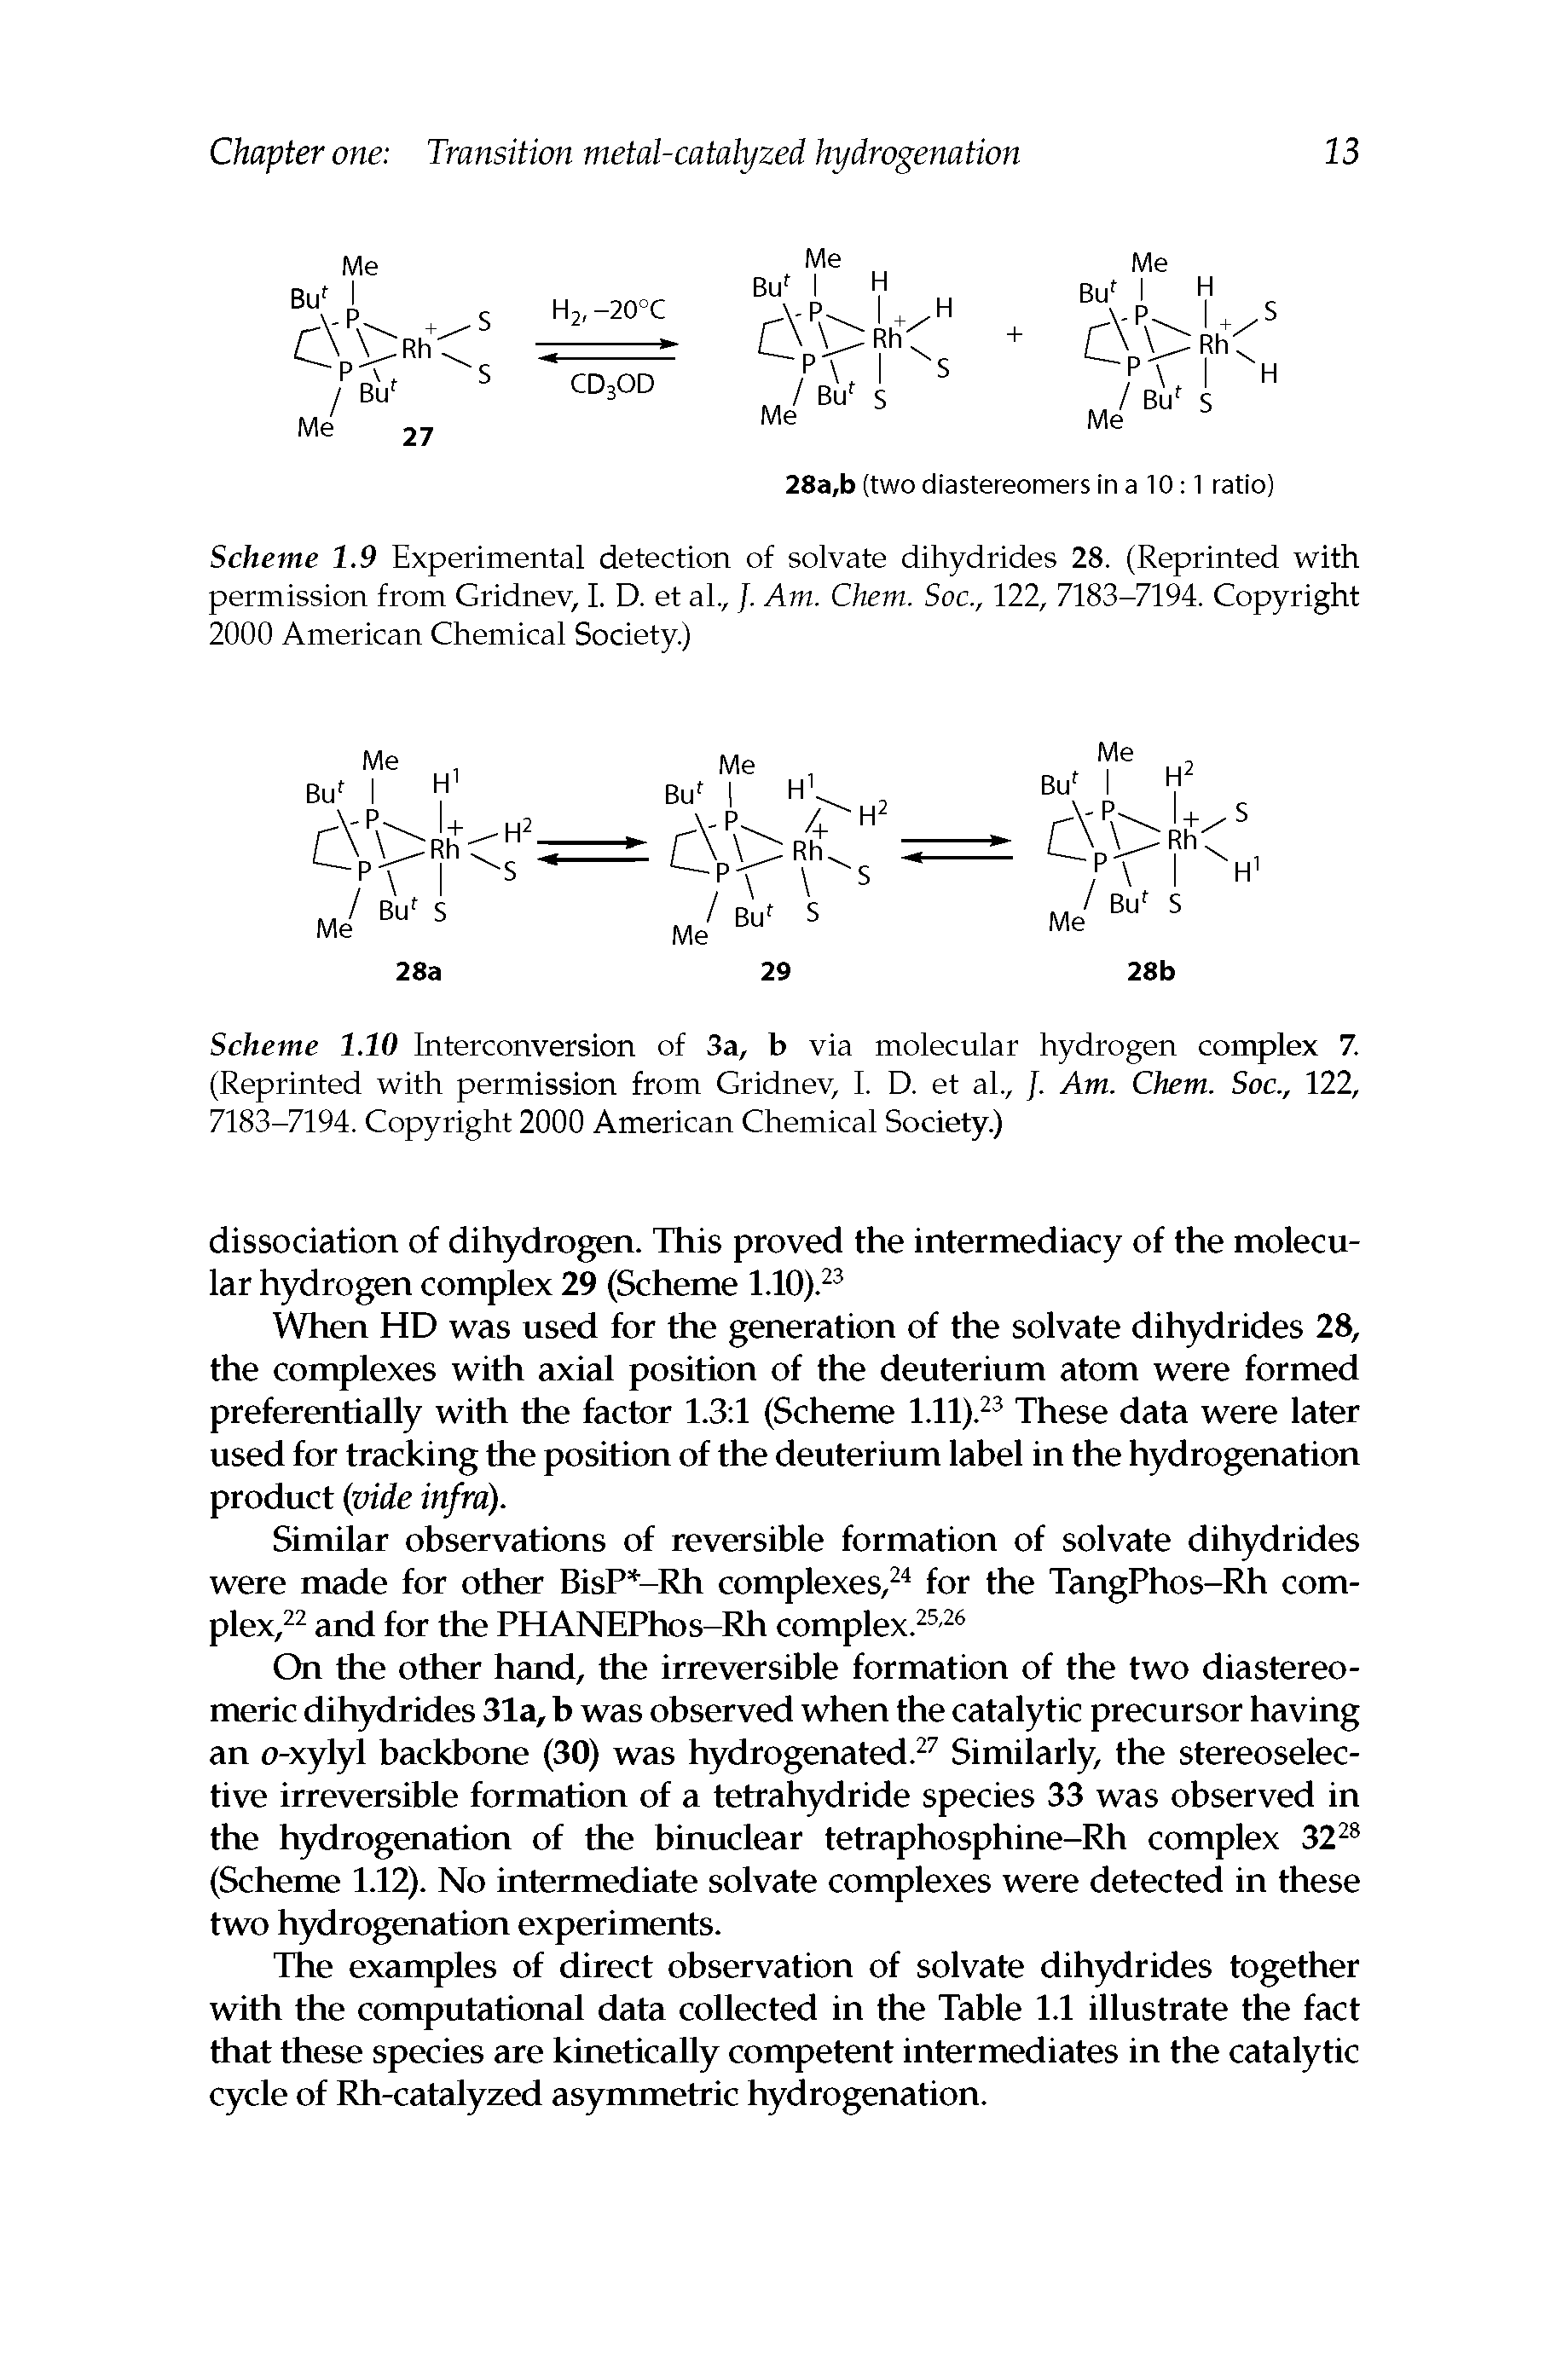 Scheme 1.9 Experimental detection of solvate dihydrides 28. (Reprinted with permission from Gridnev, I. D. et al., /. Am. Chem. Soc., 122, 7183-7194. Copyright 2000 American Chemical Society.)...